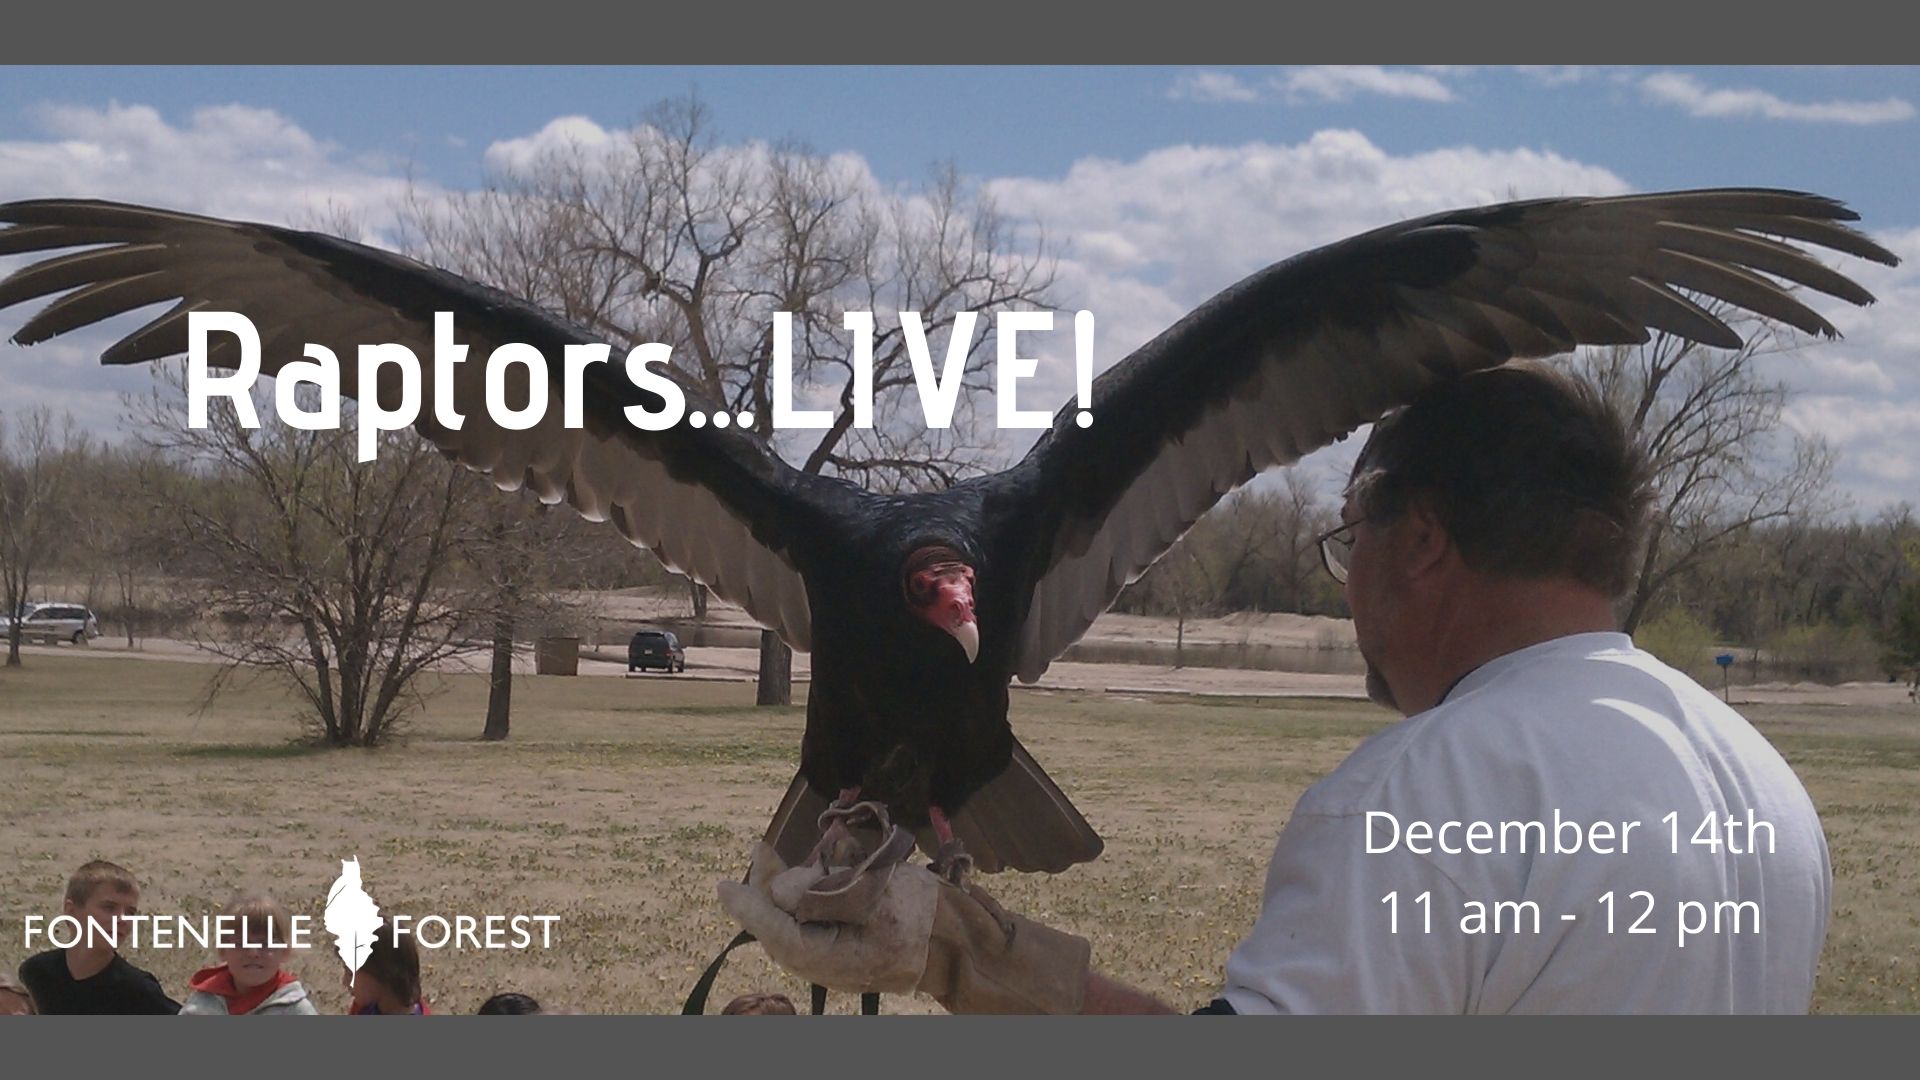 a large bird with a handler and some other people in the background.  It has the text, "Raptors...LIVE!" it has the Fontenelle Forest logo in white in the bottom left corner and the text, "December 14th 11am - 12pm" in the bottom right  corner.